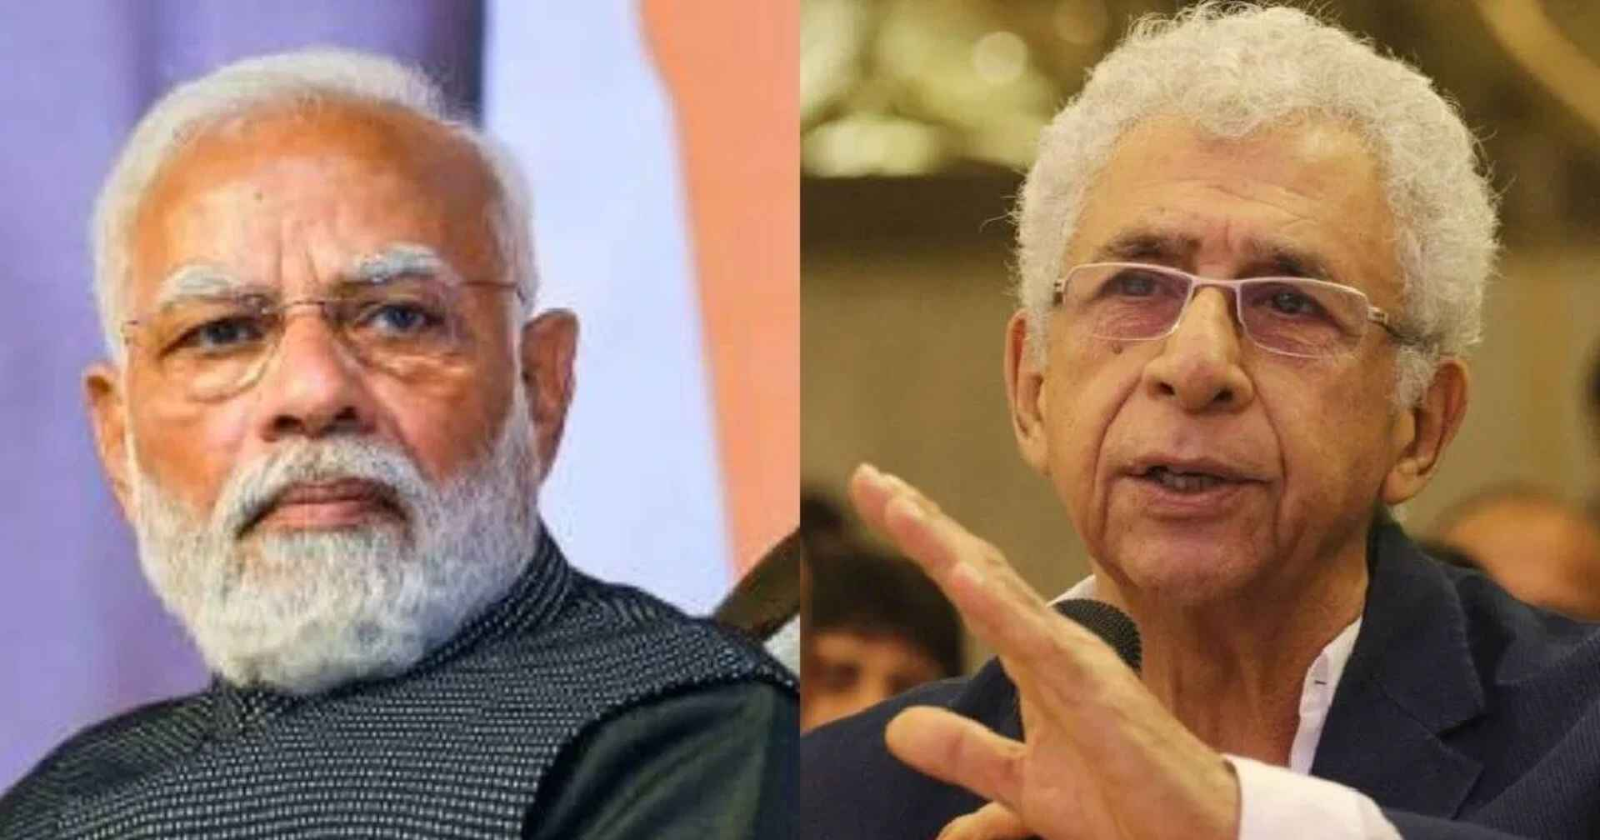 WATCH 039 I Want To See Modi In039 Naseeruddin Shah039s